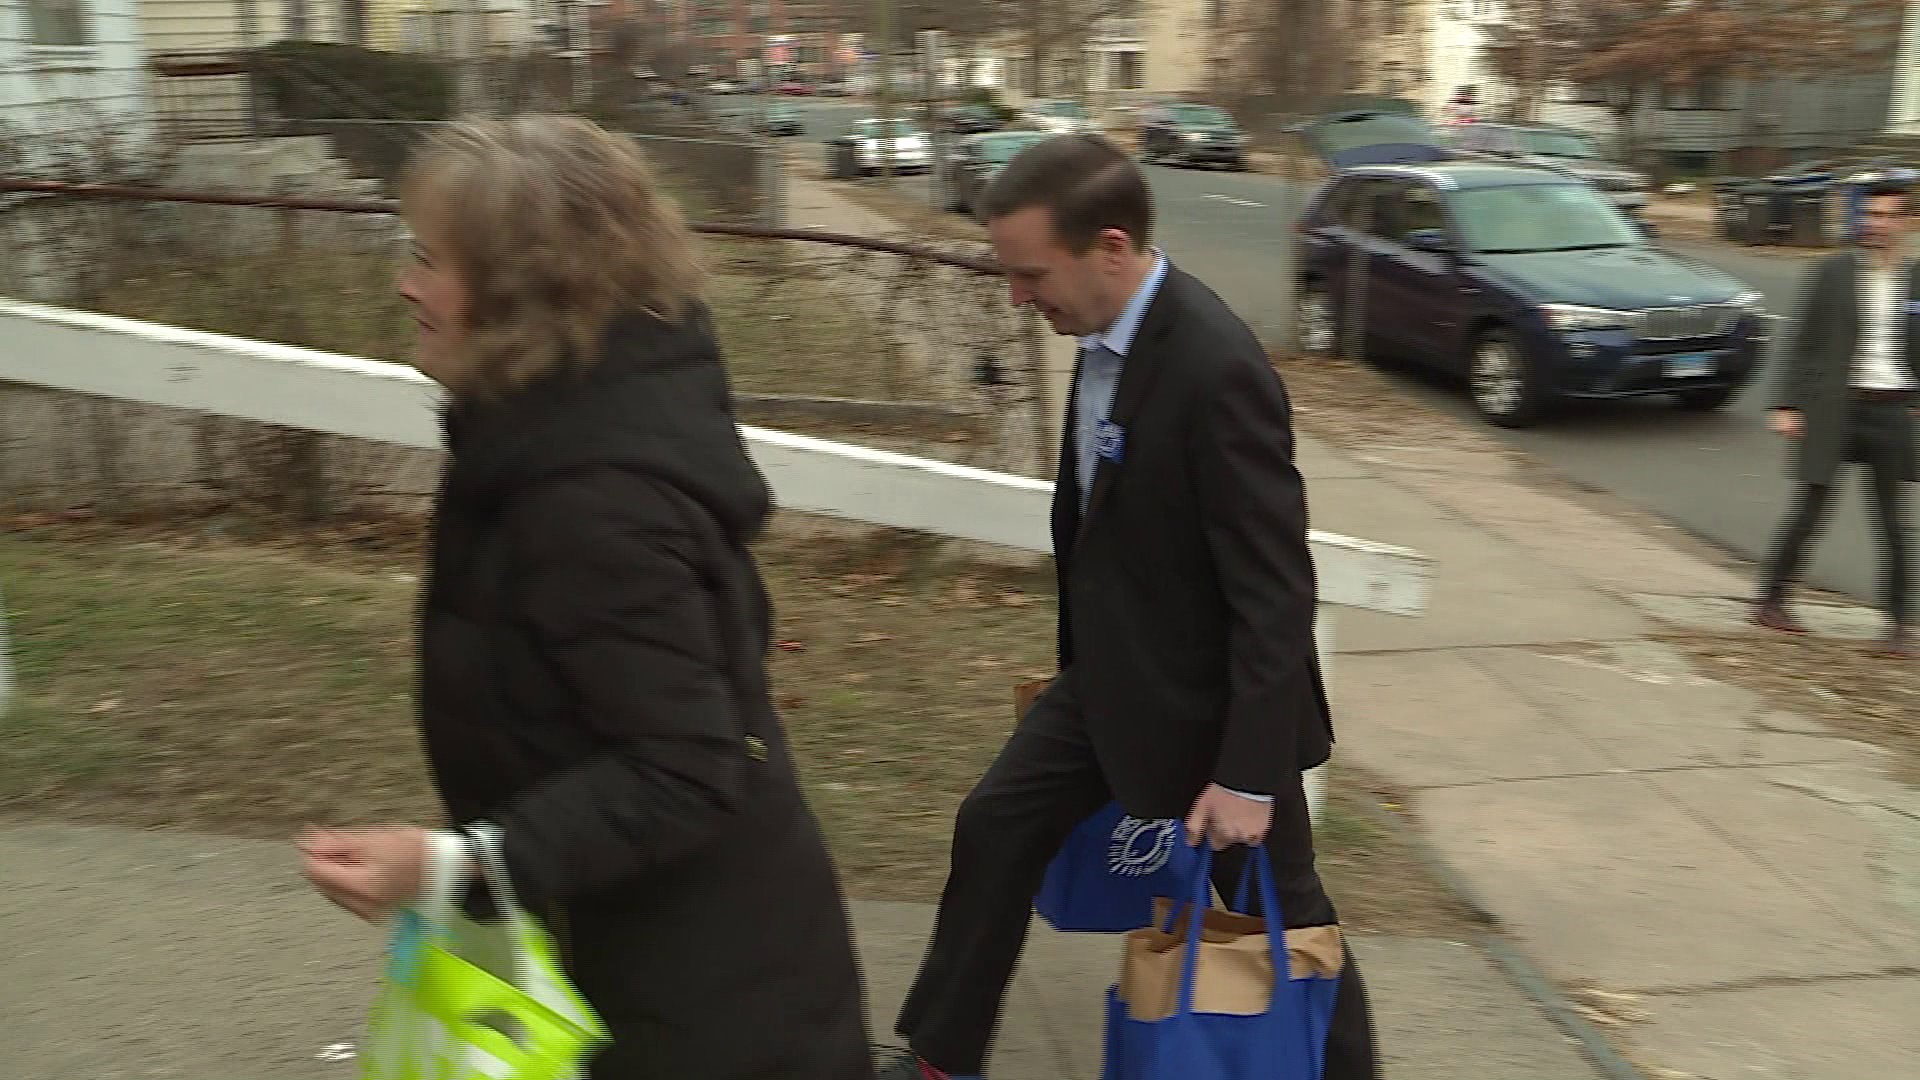 Acts of kindness important to Sen. Murphy after Sandy Hook